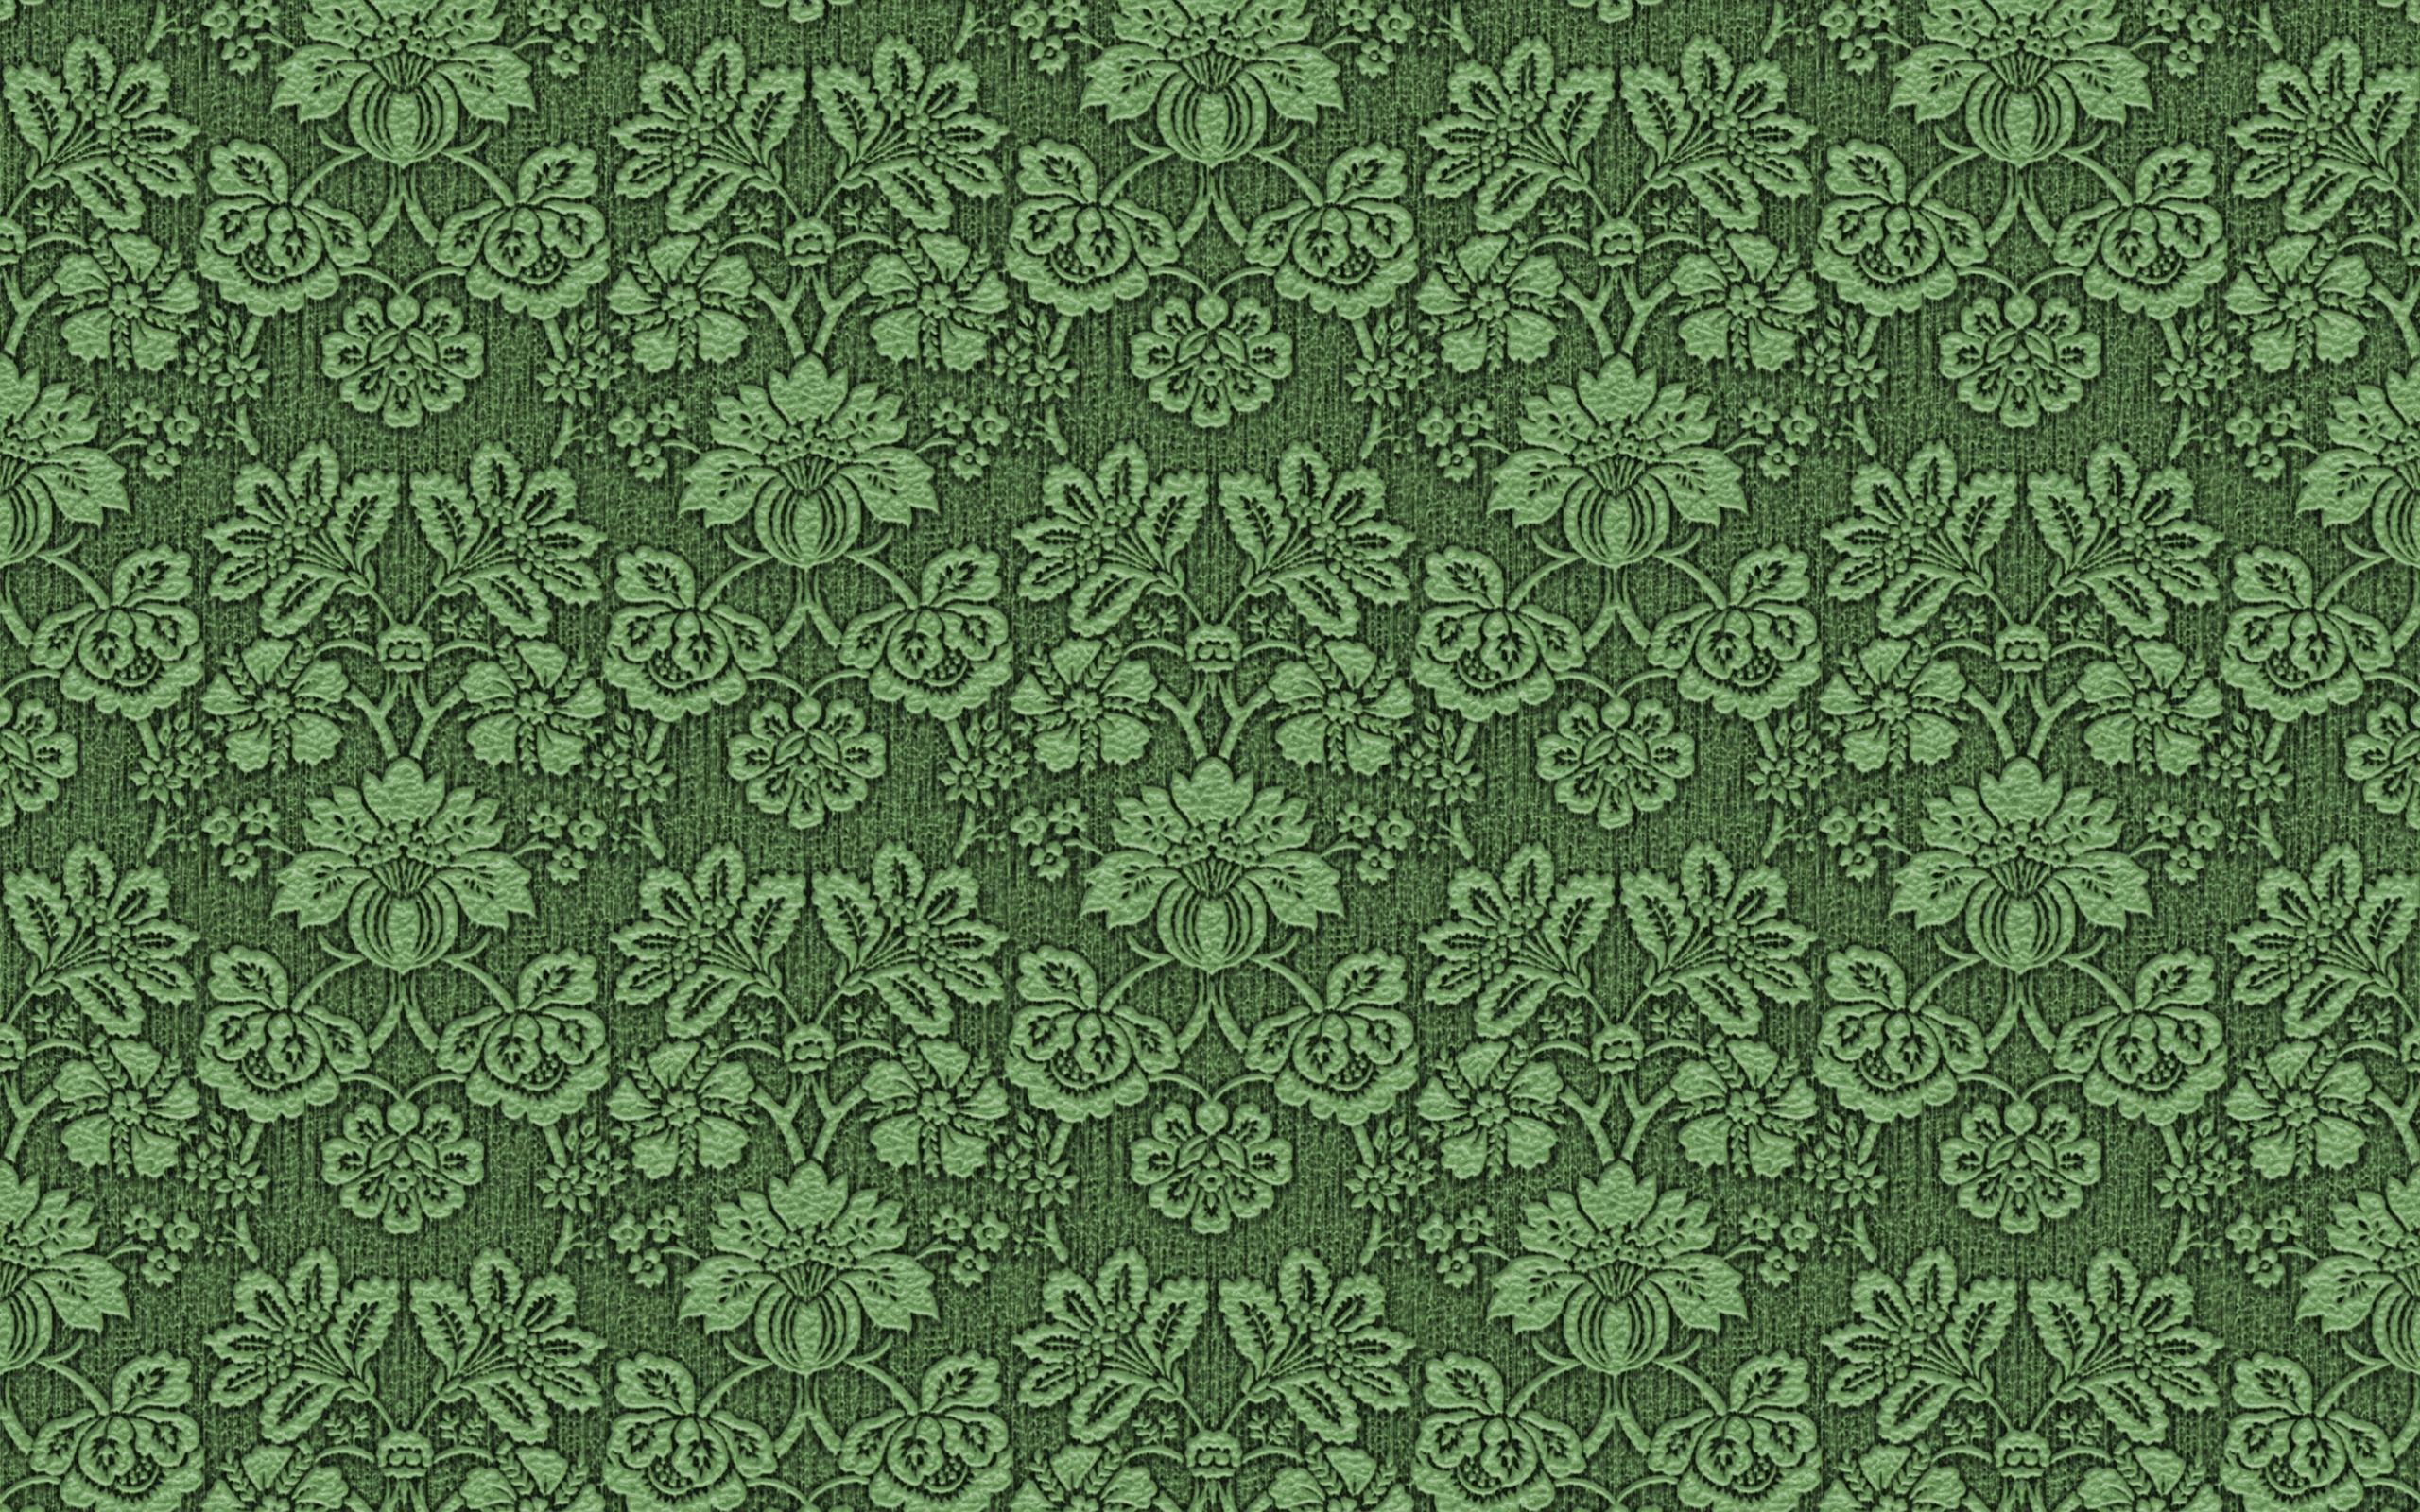 Green Fabric Wallpapers - Top Free Green Fabric Backgrounds ...